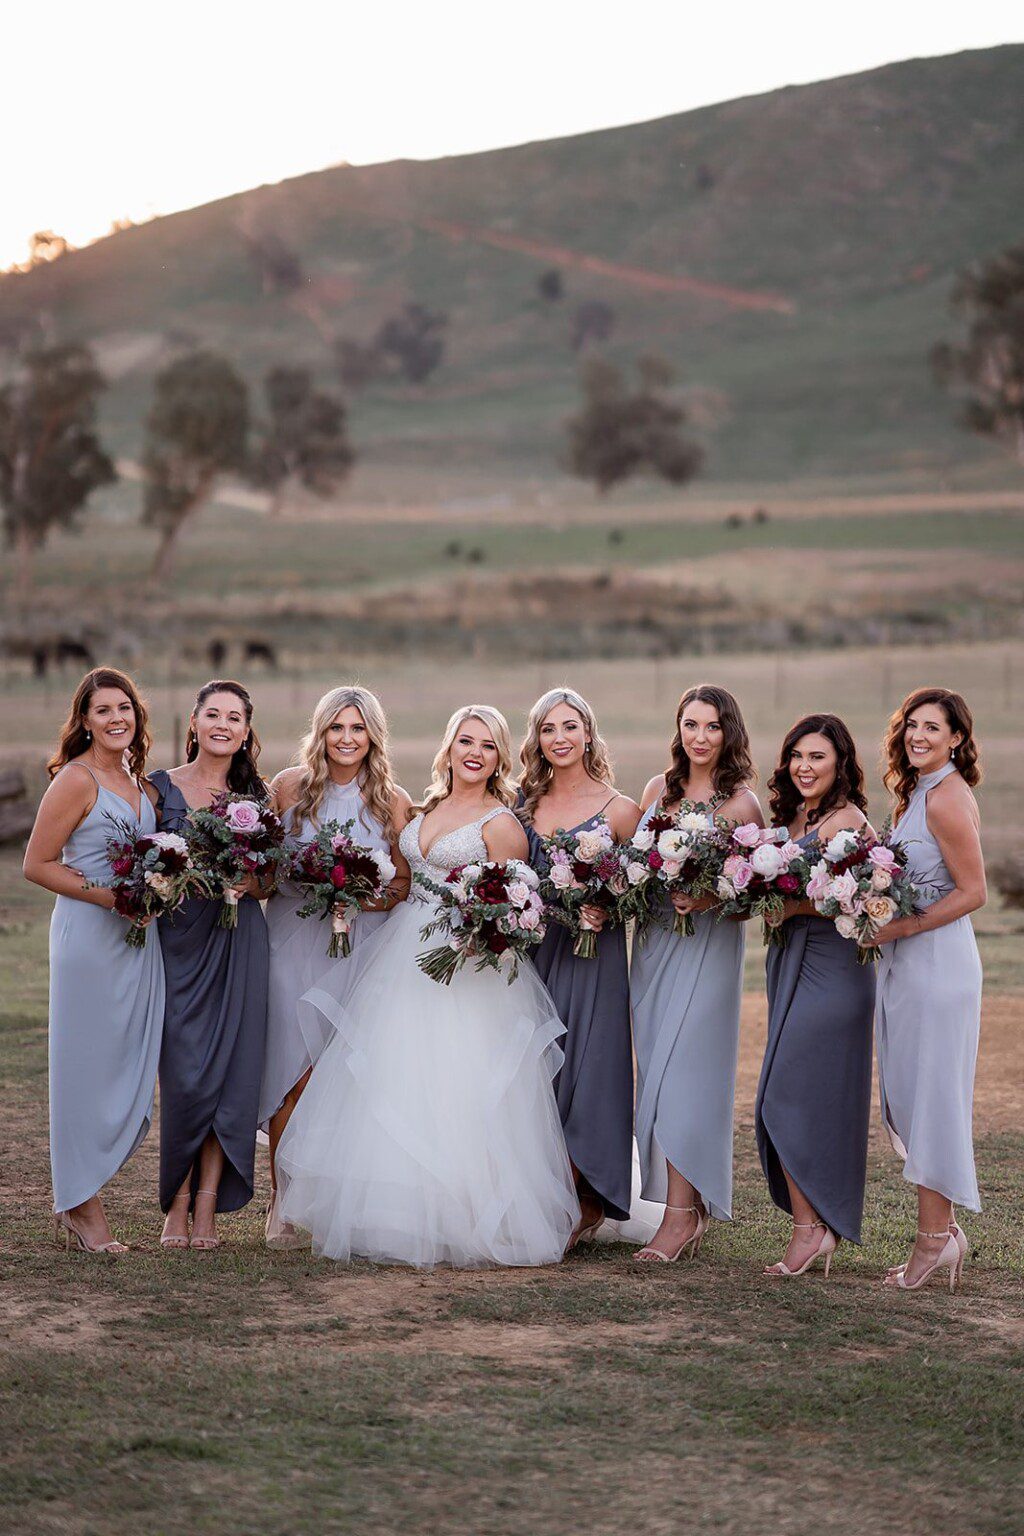 Rustic, Elegant and Authentic Farm Wedding Venue made for you. | Kimo ...